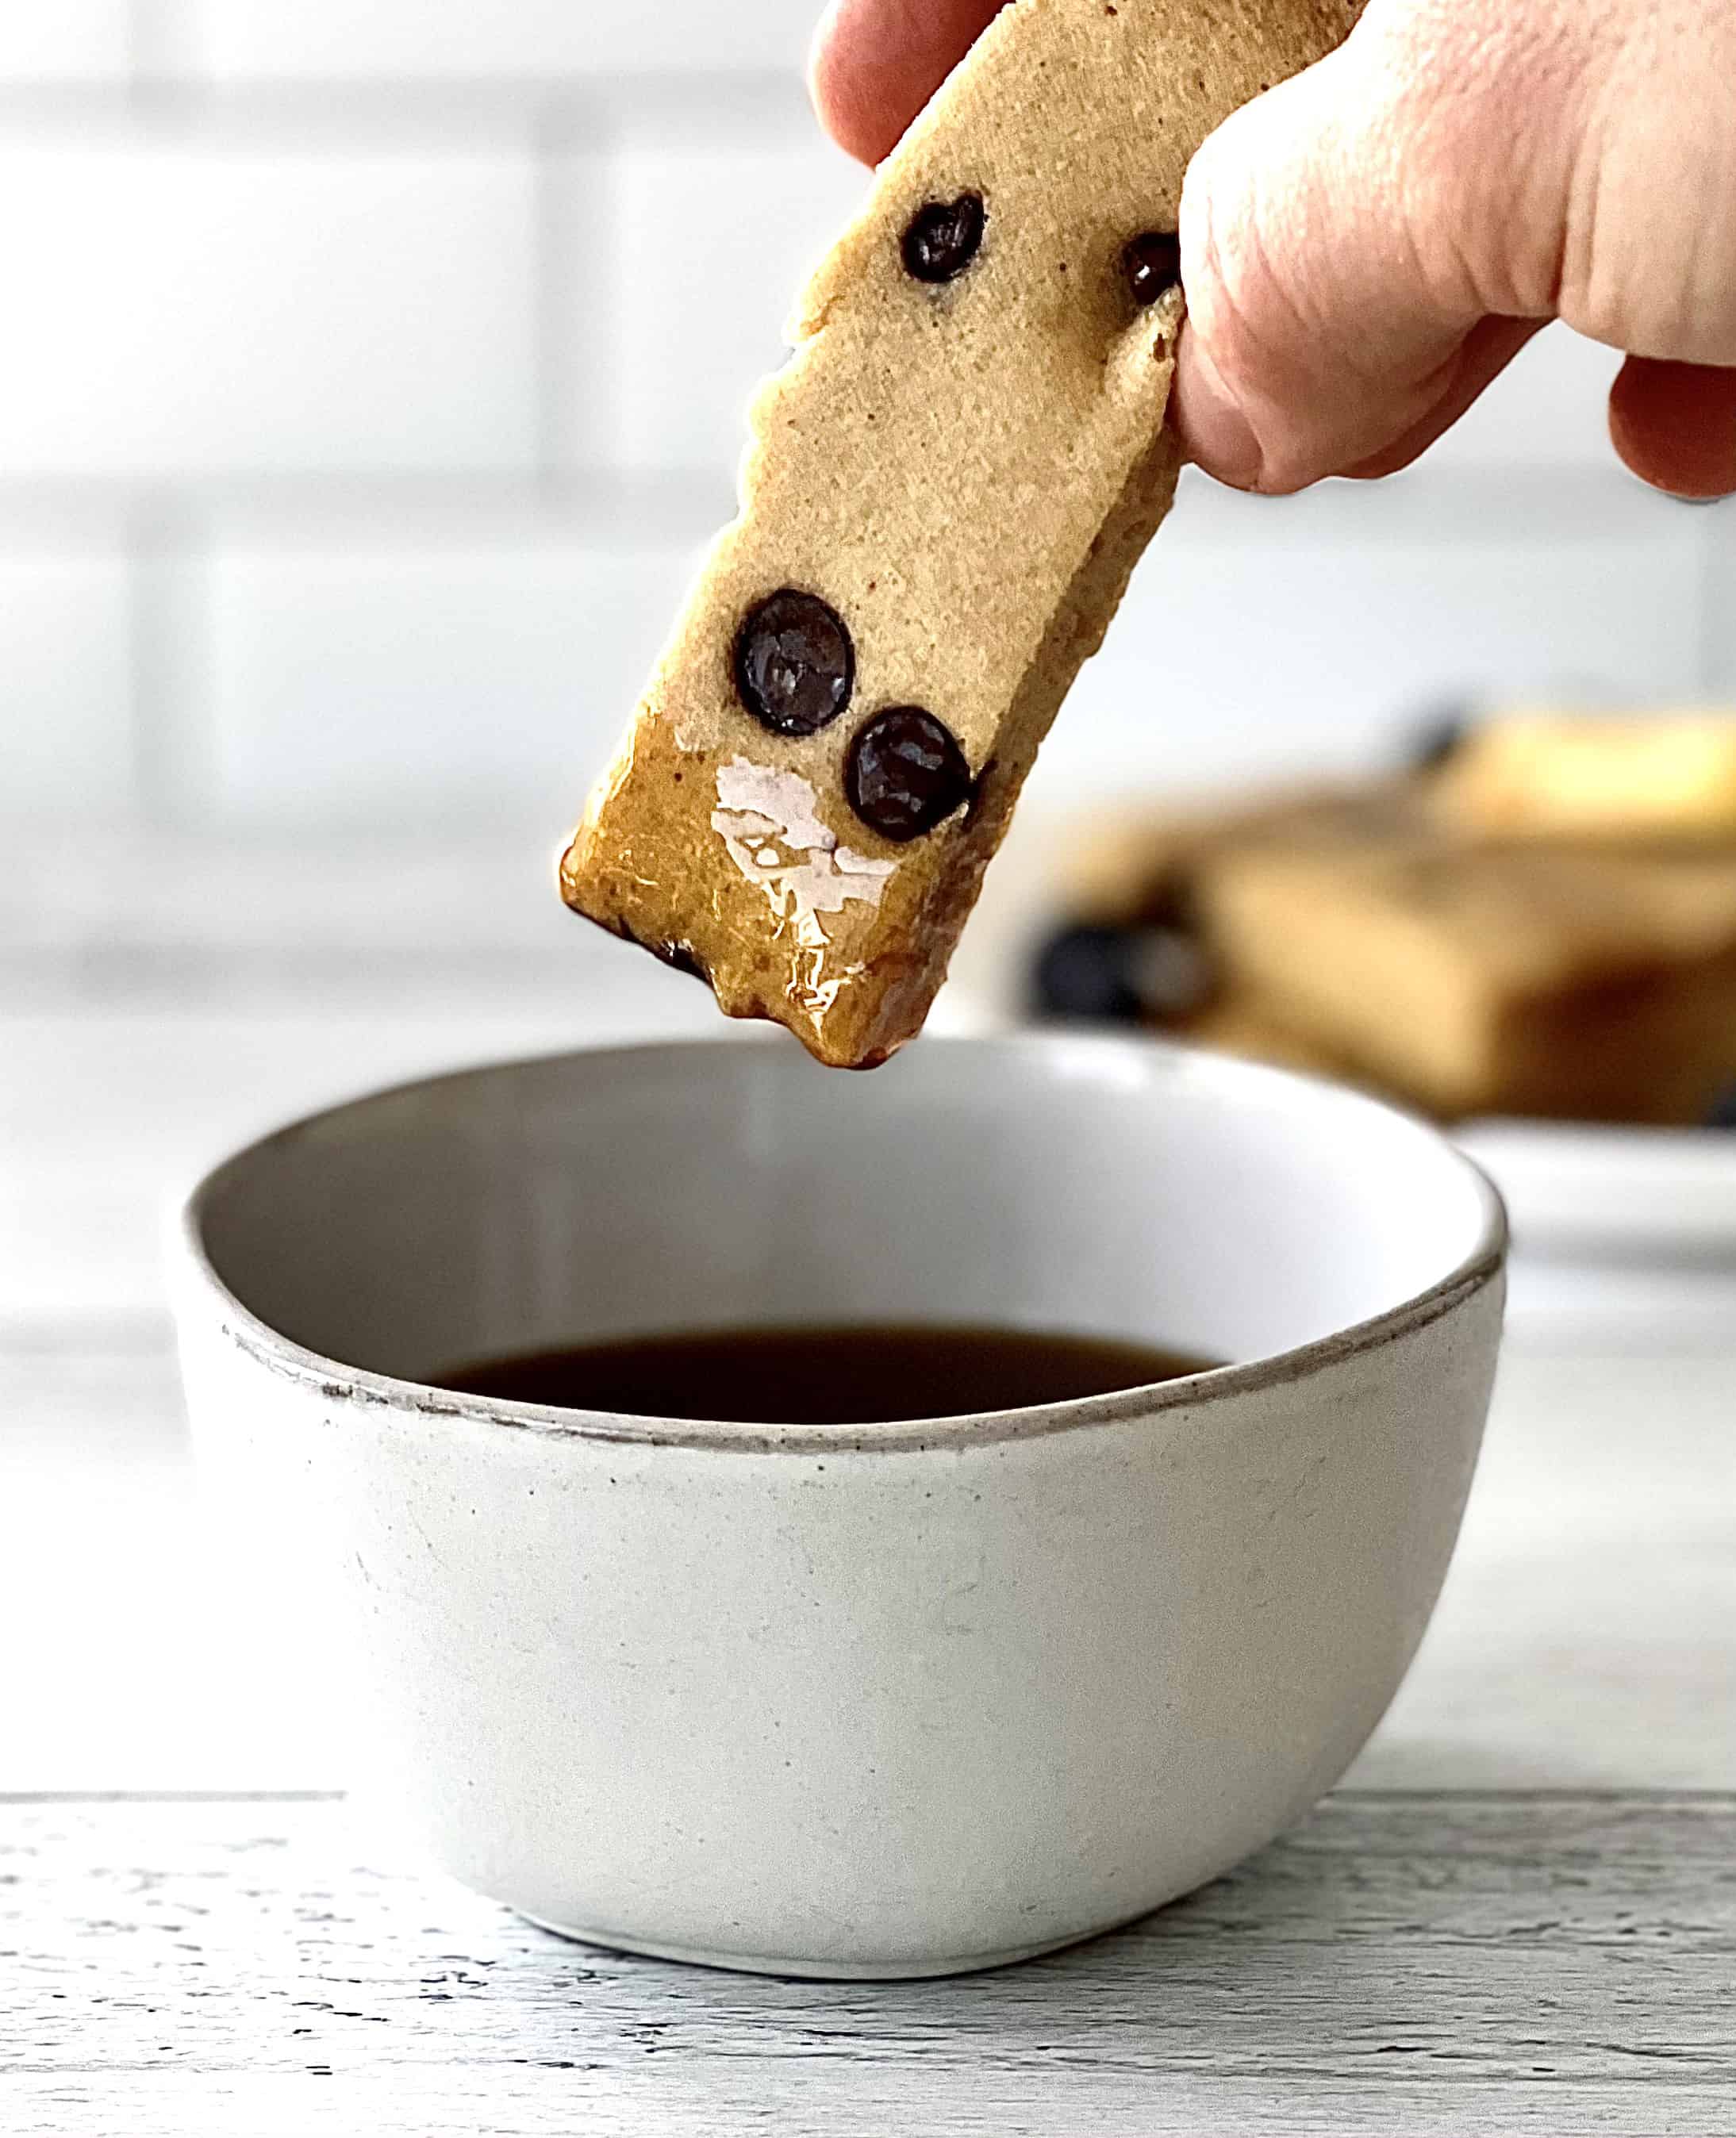 a long rectangular pancake studded with chocolate chips is dipped into a bowl of maple syrup